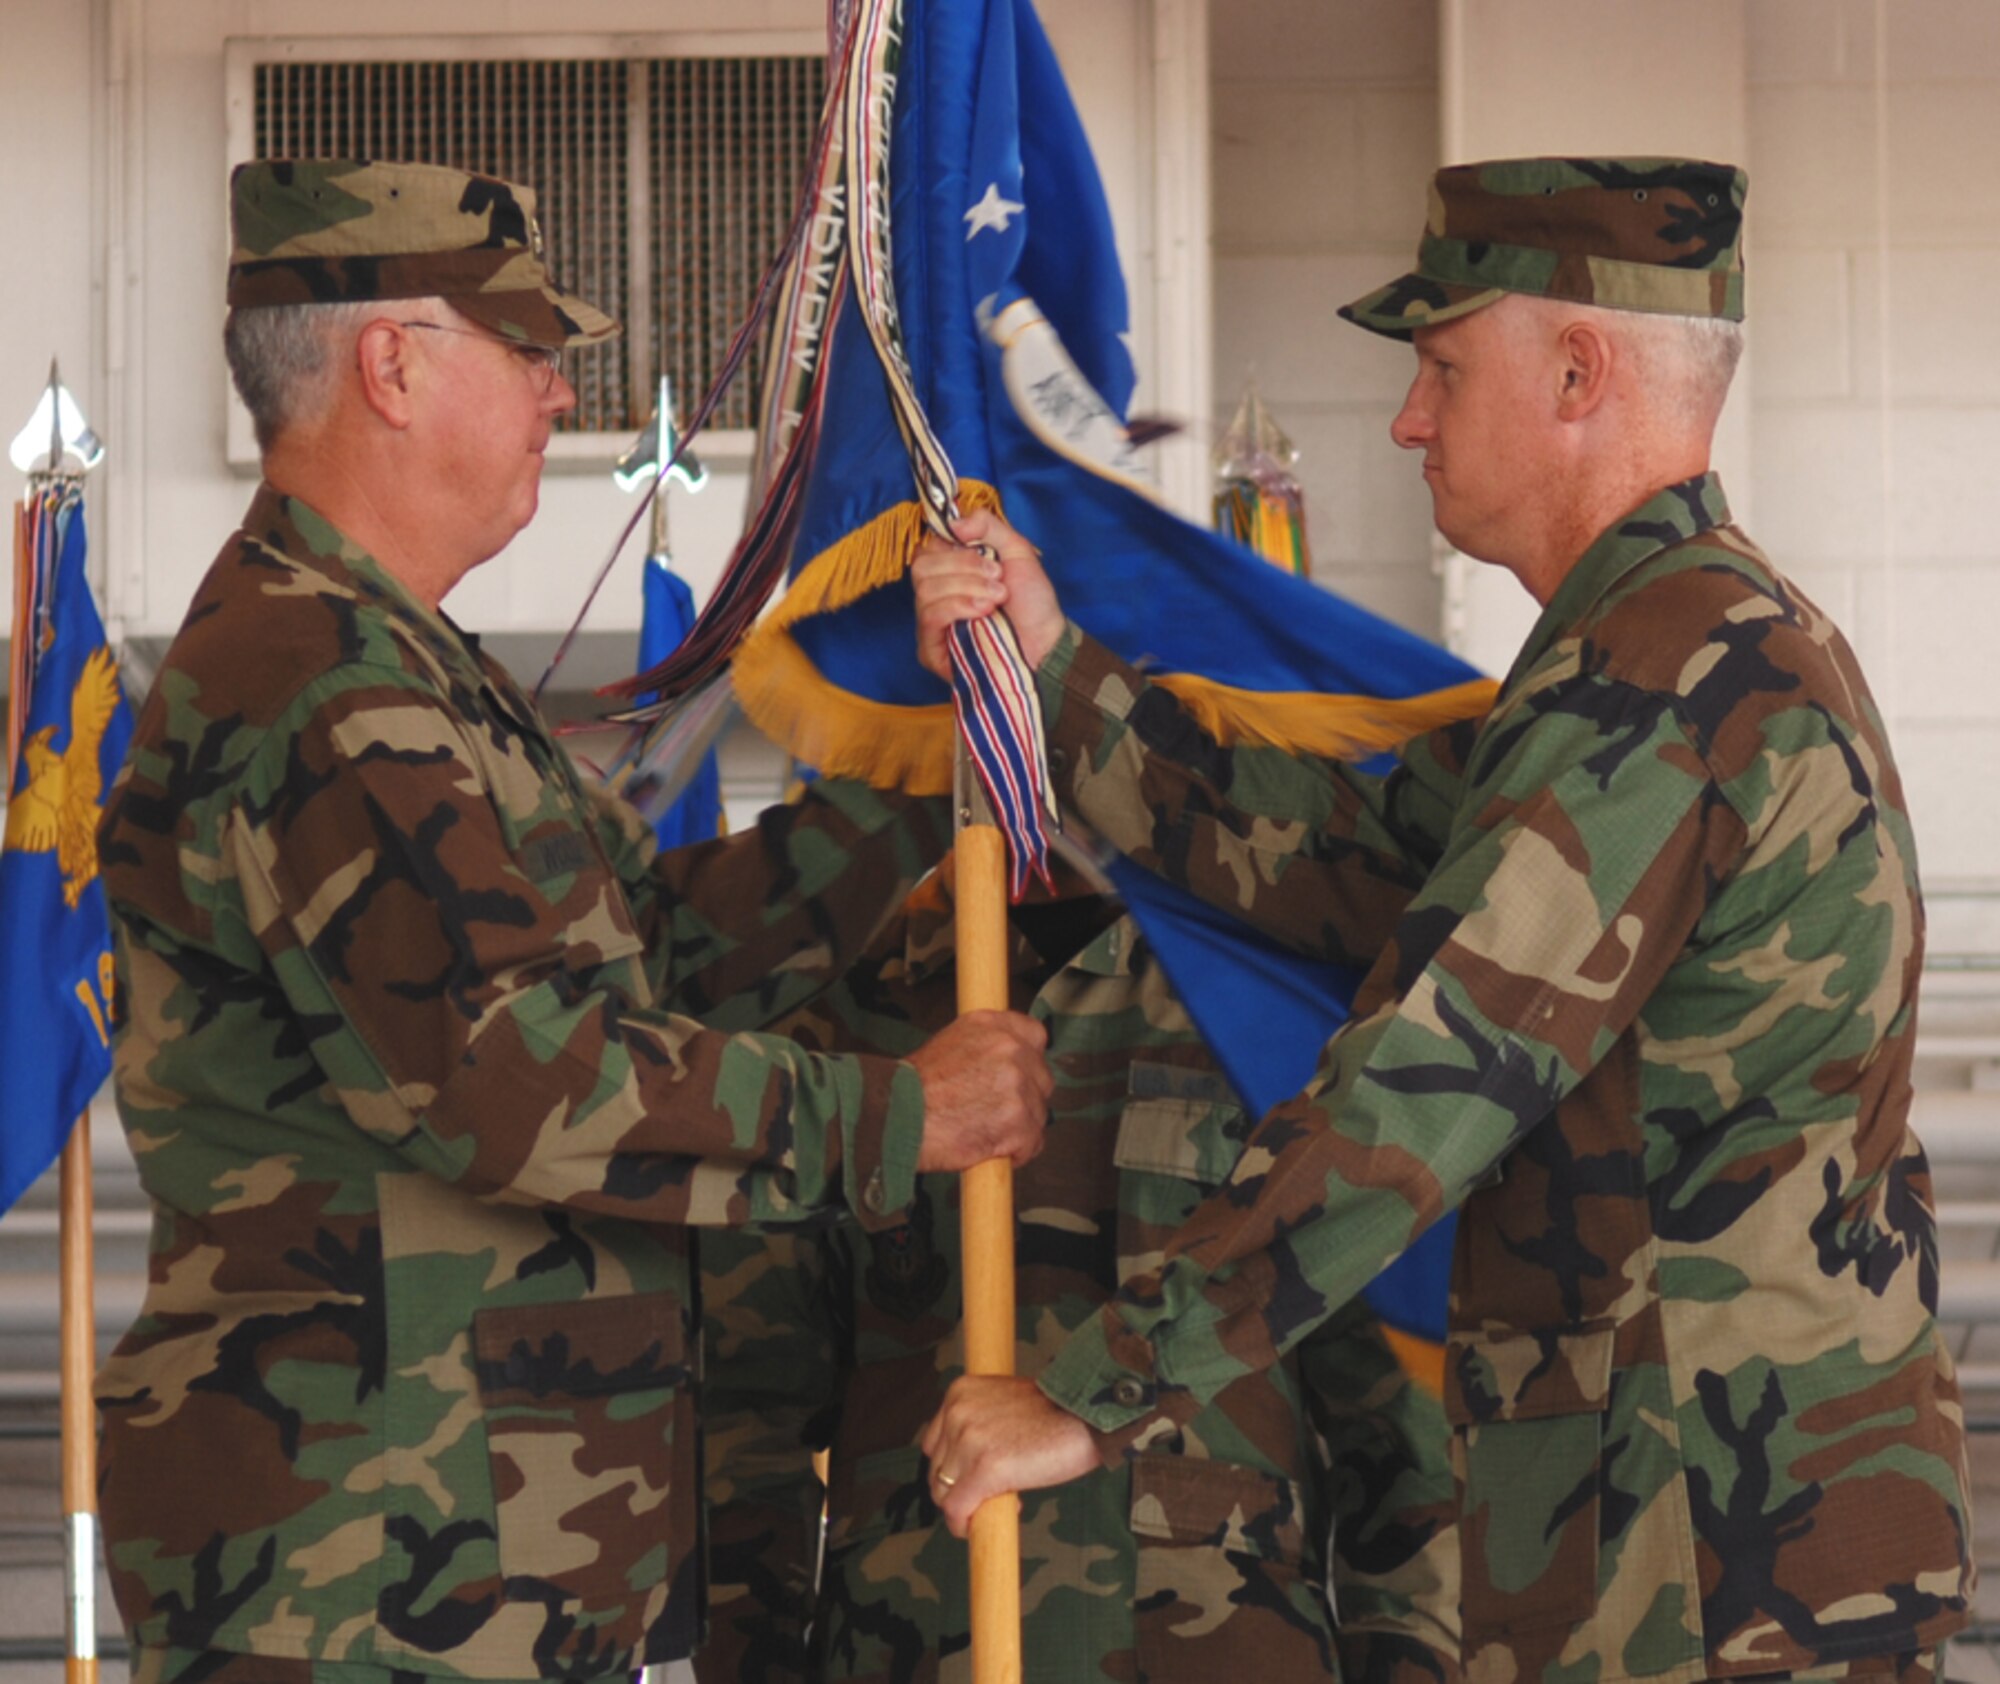 Col. Norm Brozenick Jr., former 1st Special Operations Wing commander, passes the 1st SOW guidon to Lt. Gen. Michael Wooley, Air Force Special Operations Command commander, during the change of command ceremony held Tuesday at Freedom Hangar. (U.S. Air Force photo by Senior Airman Andy Kin)